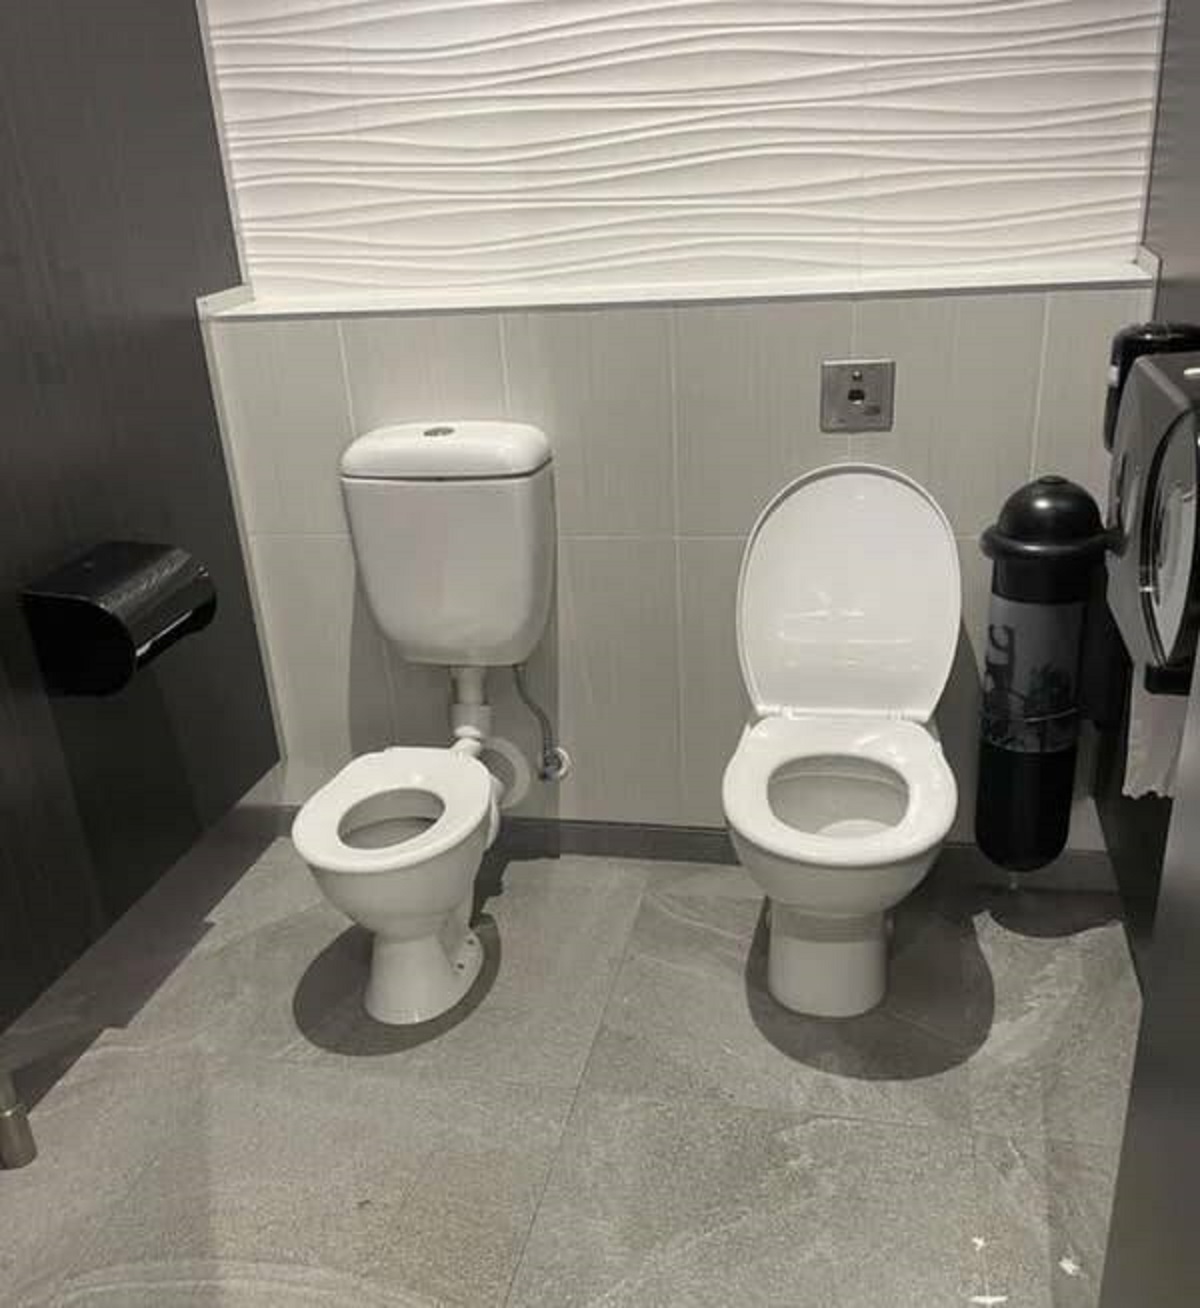 The Auckland airport in New Zealand has a child's toilet and an adult toilet in a single stall for parents.